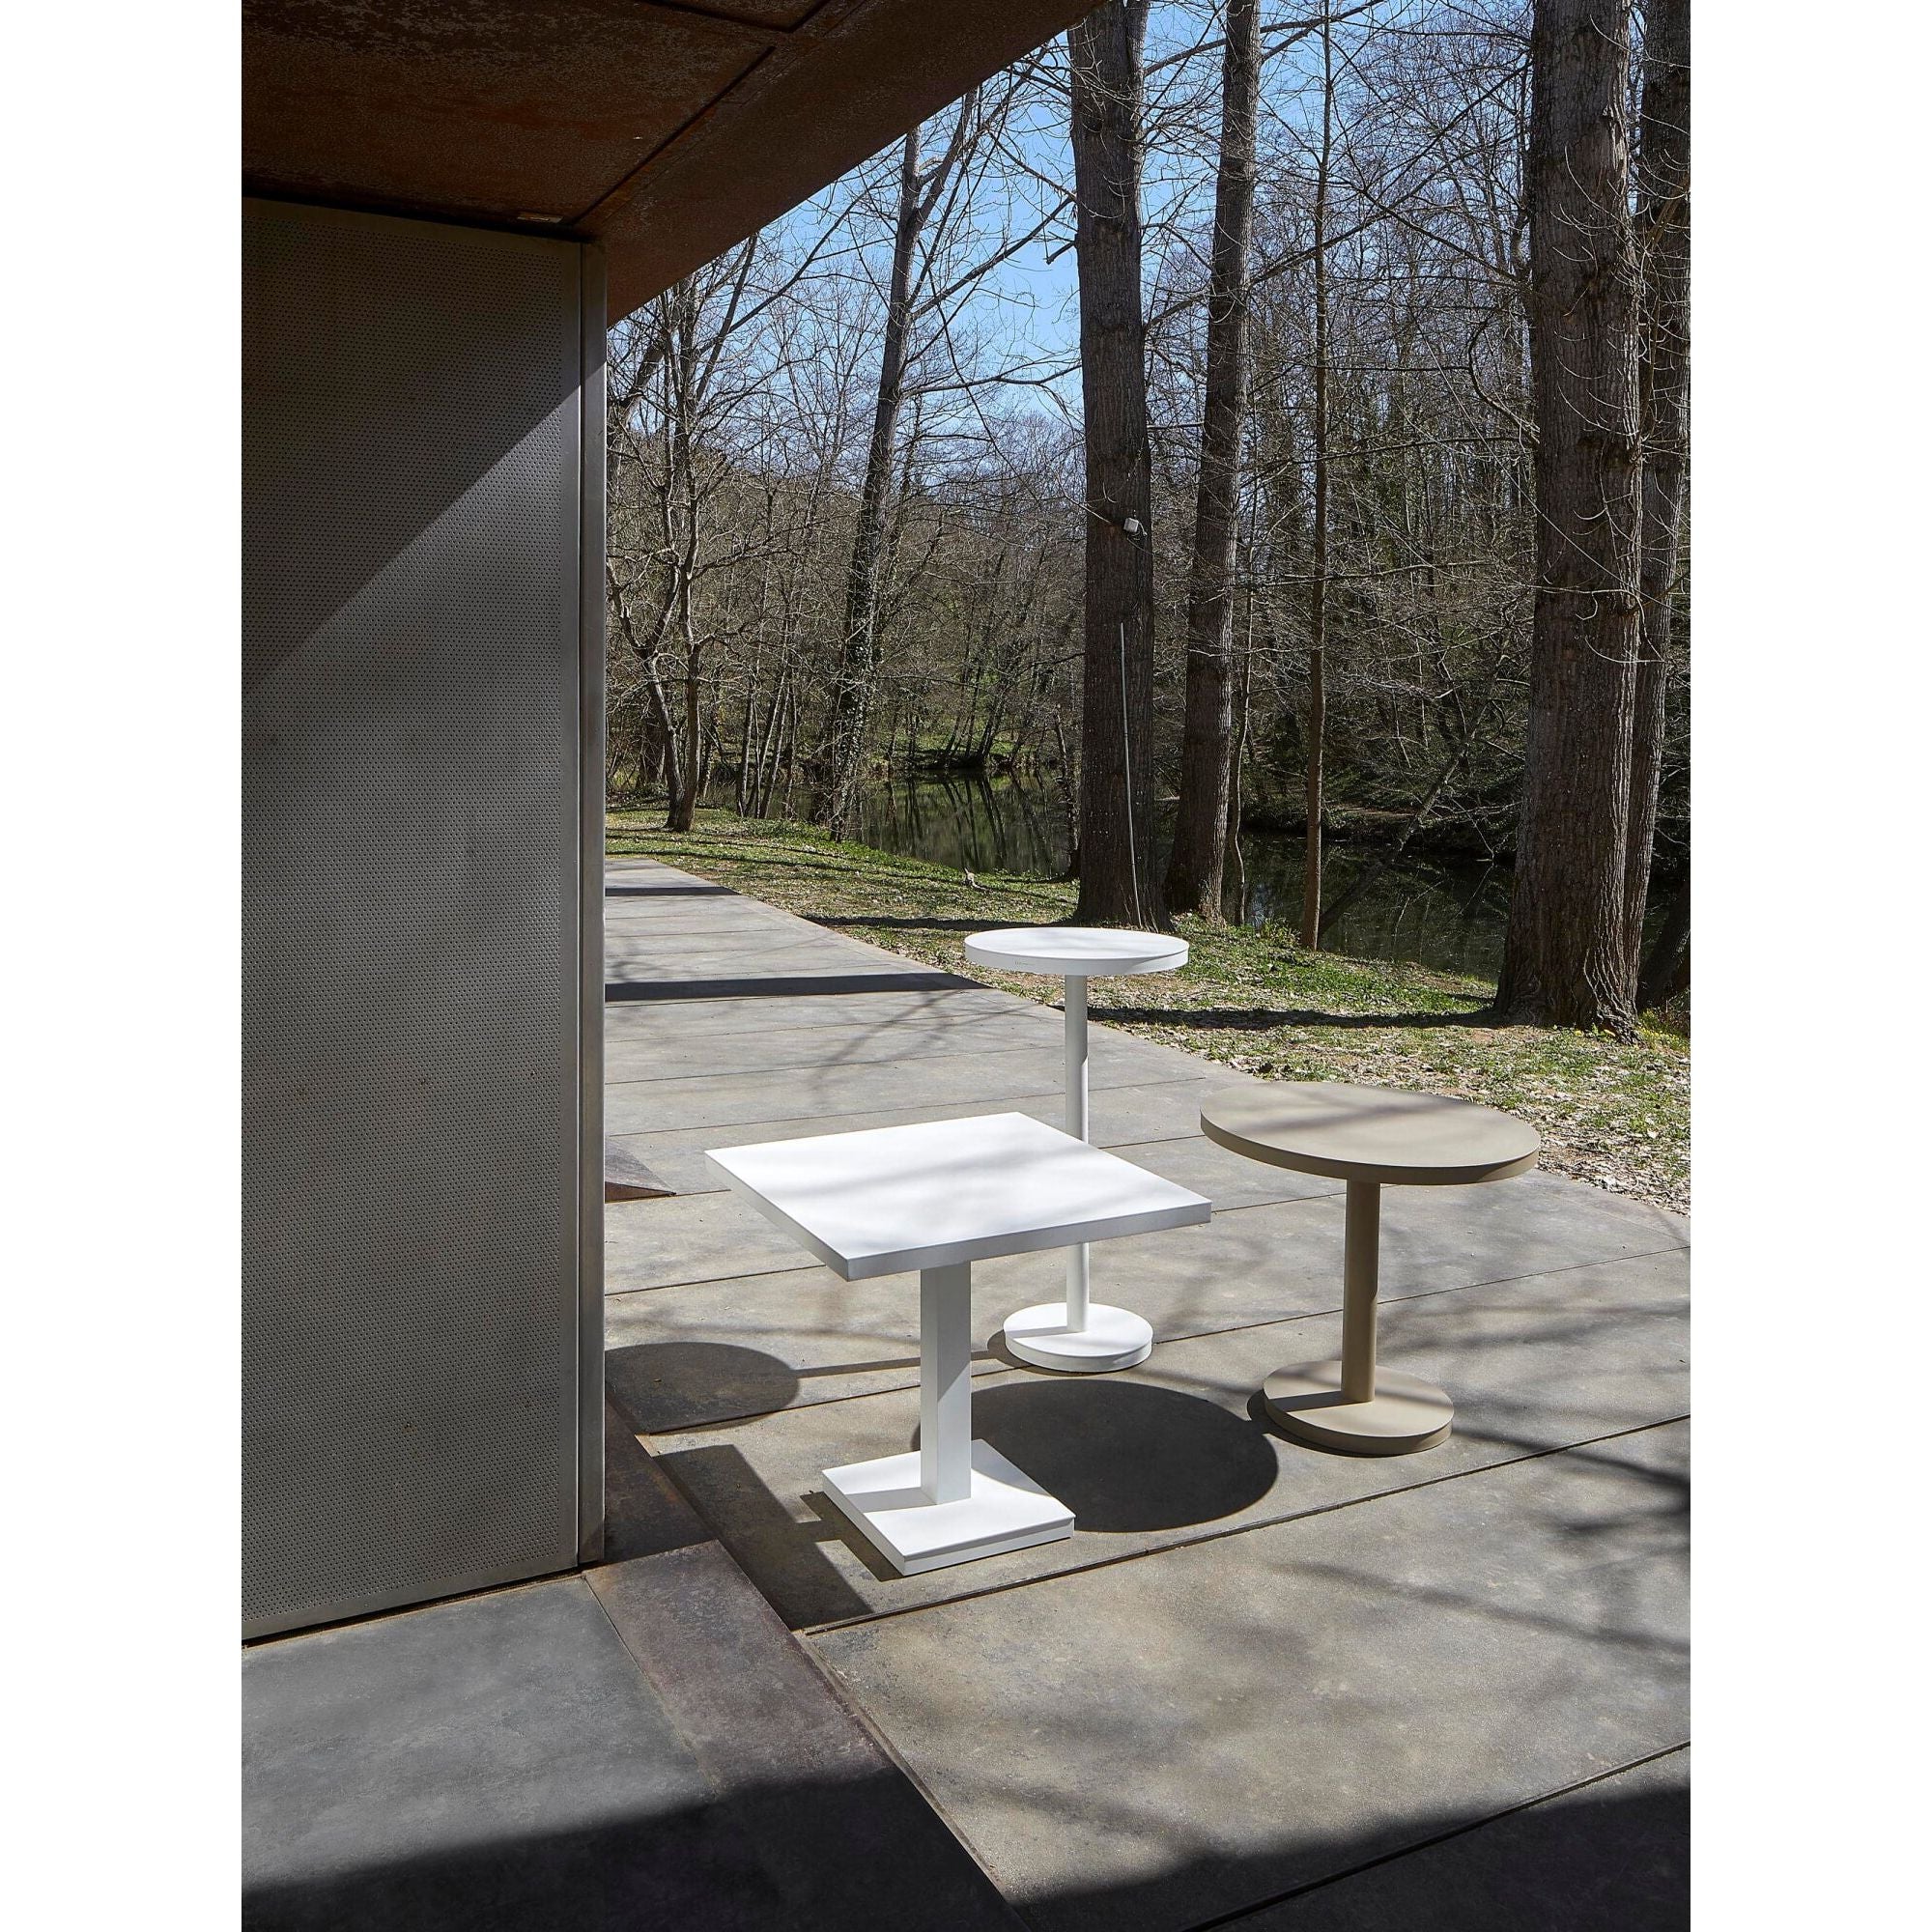 Resol Barcino Square Table indoors, outdoors 90x90 White